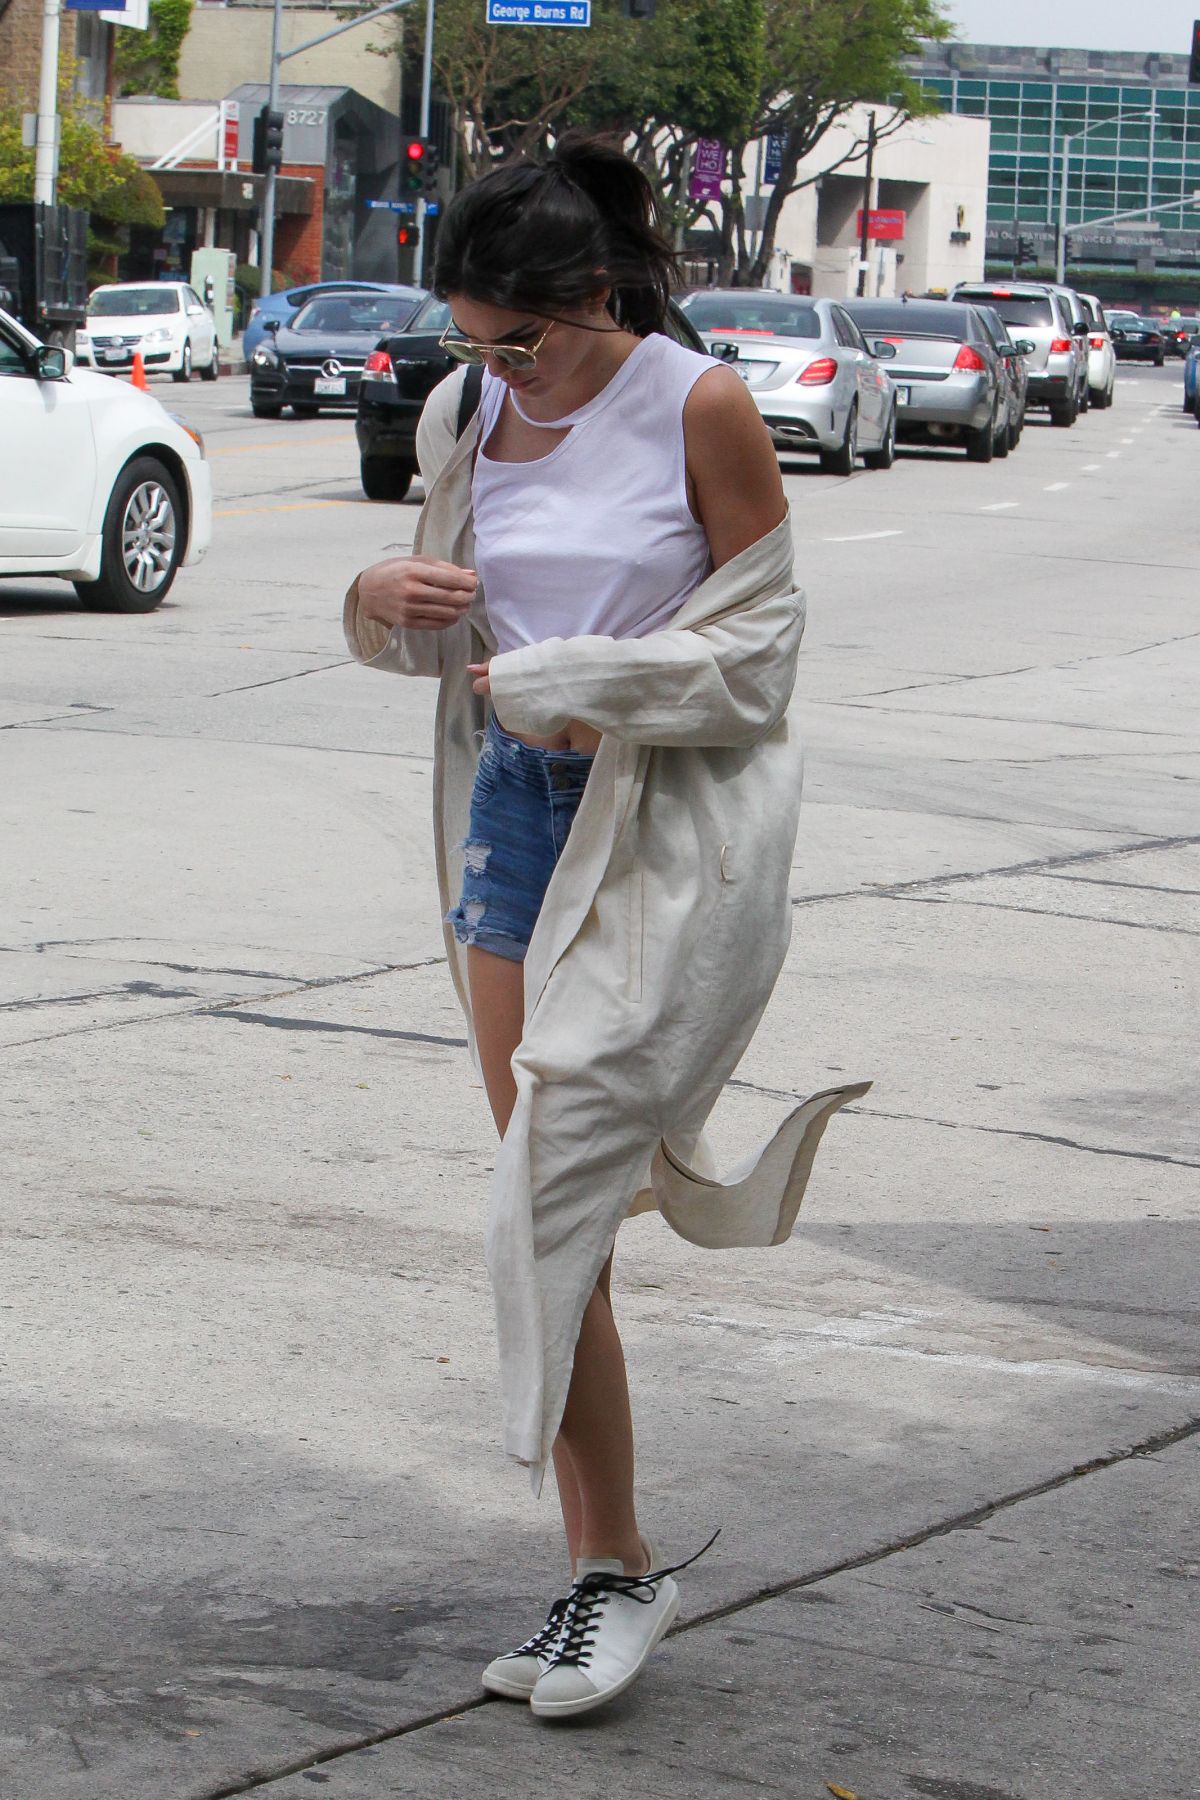 kendall-jenner-out-shopping-in-beverly-hills-04-06-2016_18.jpg